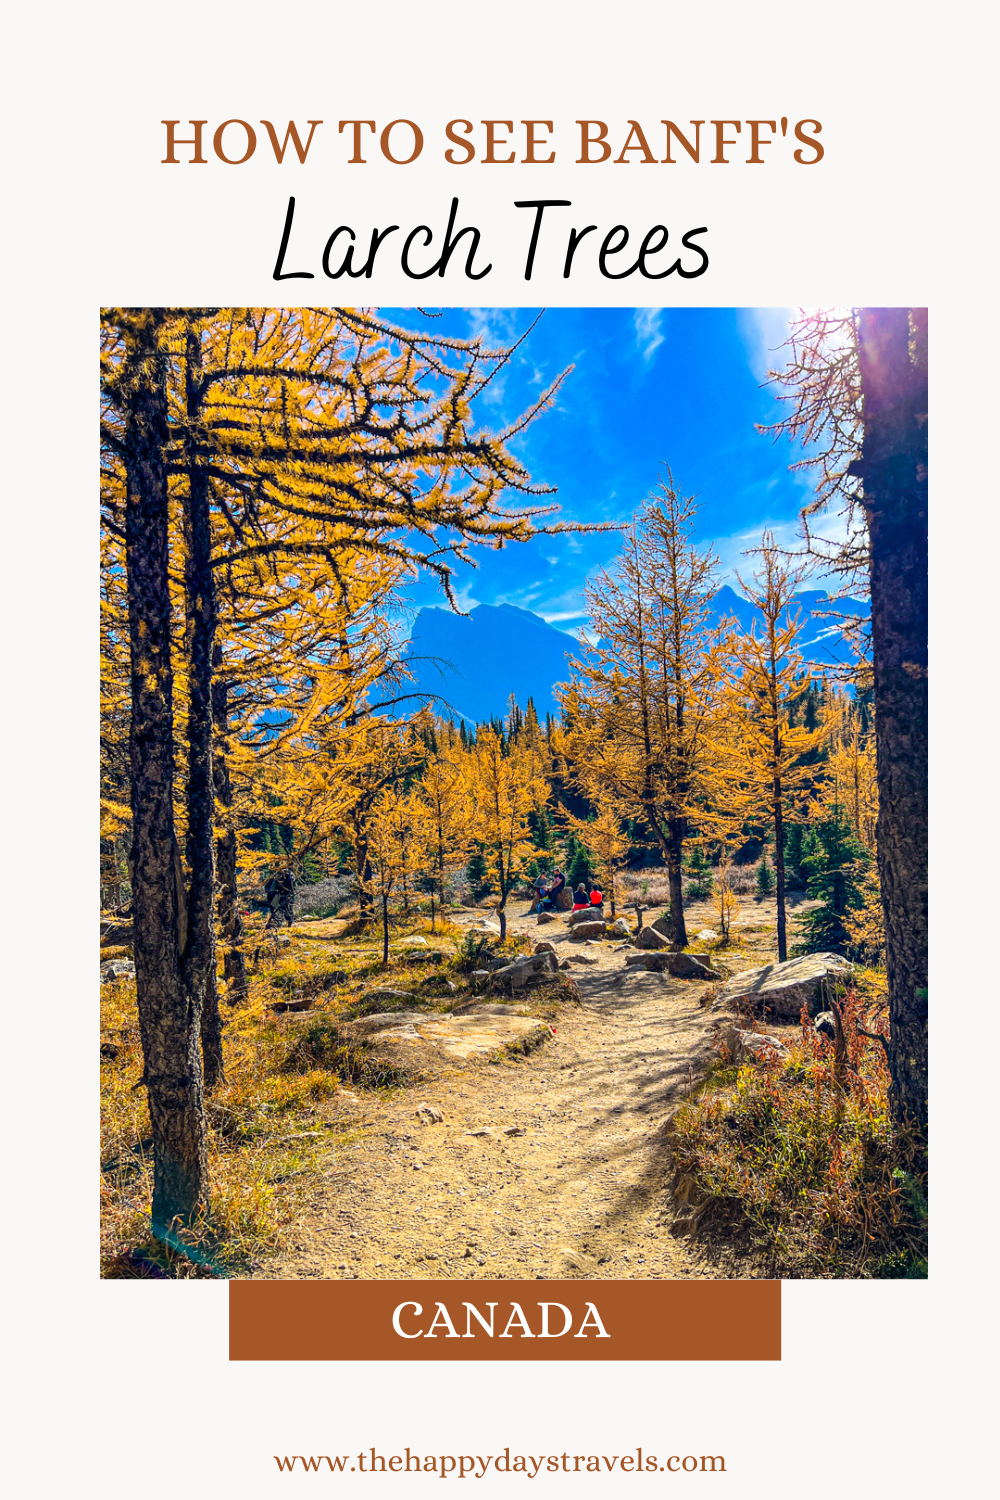 pin image of larch valley hike trees with mountains in back. text reads 'how to see Banff's Larch Trees, Canada'.